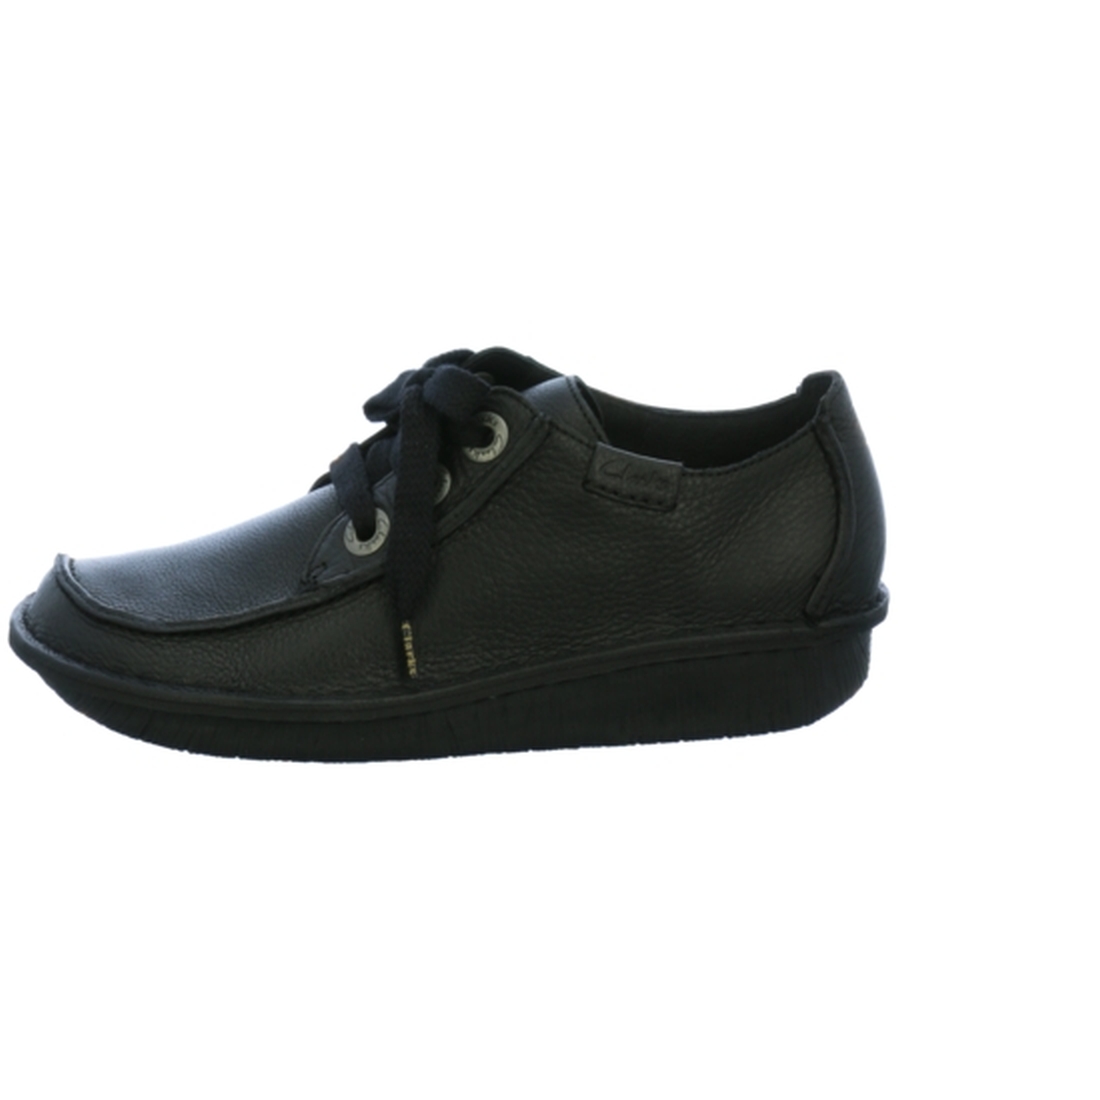 Clarks Funny Dream - Black Greased leather